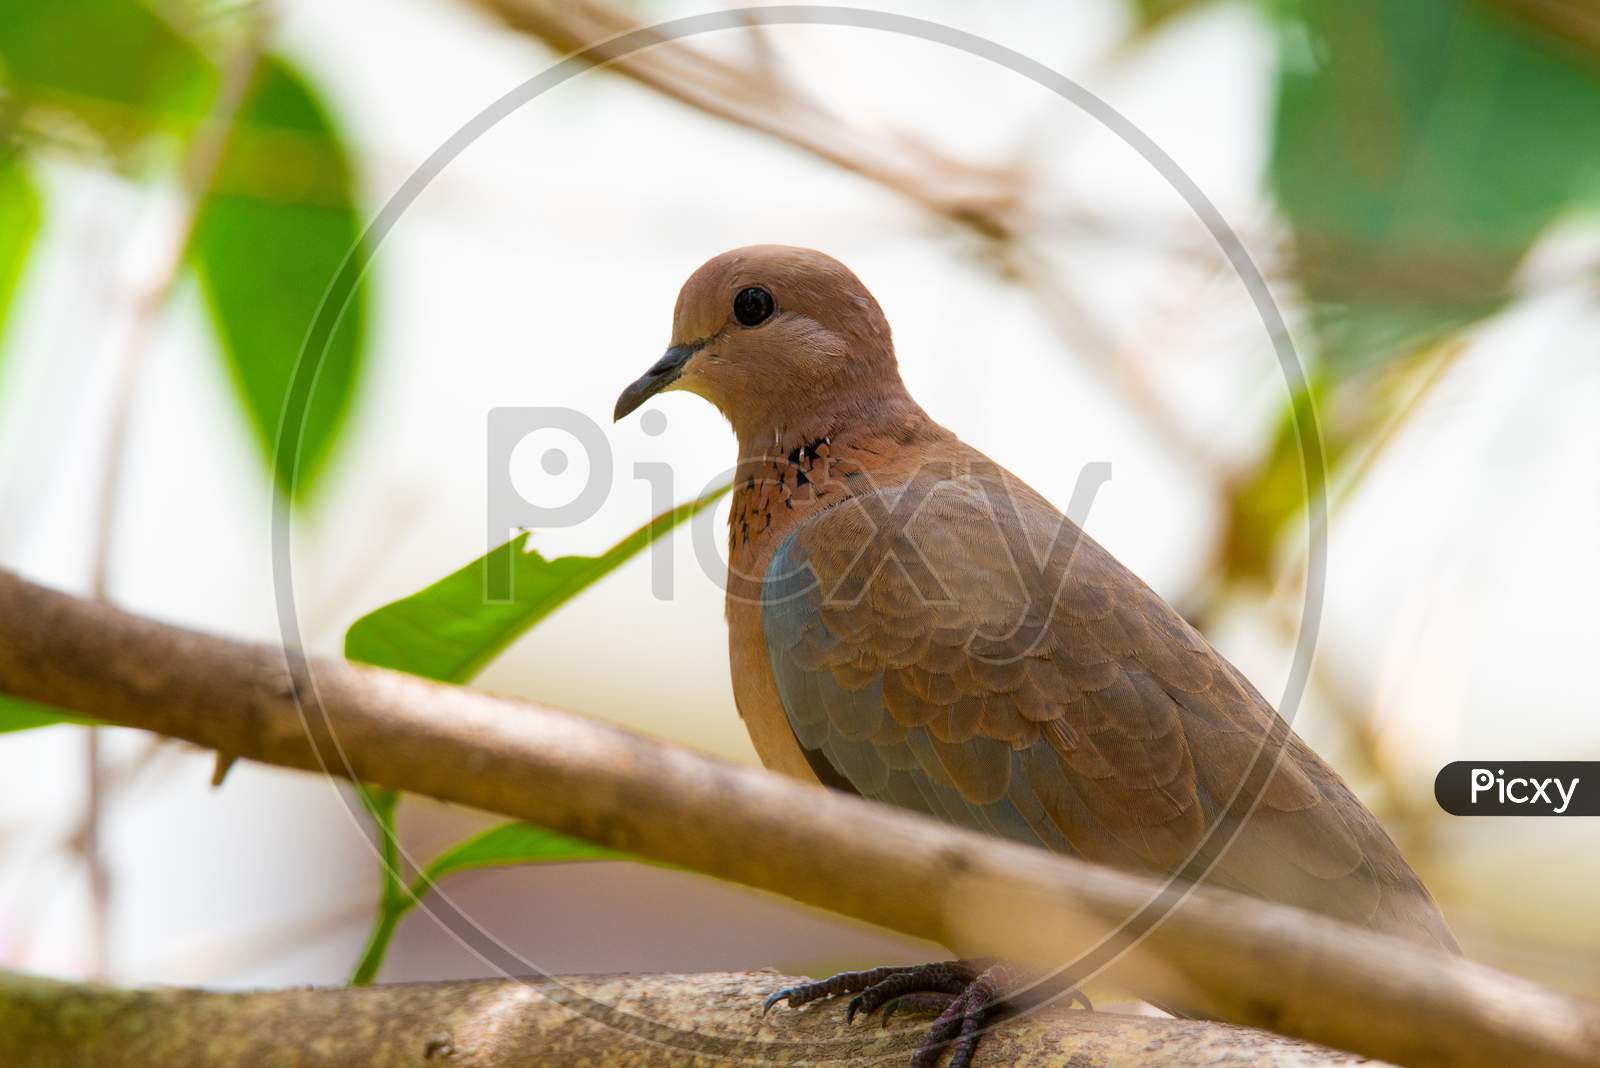 A laughing dove sitting on the tree